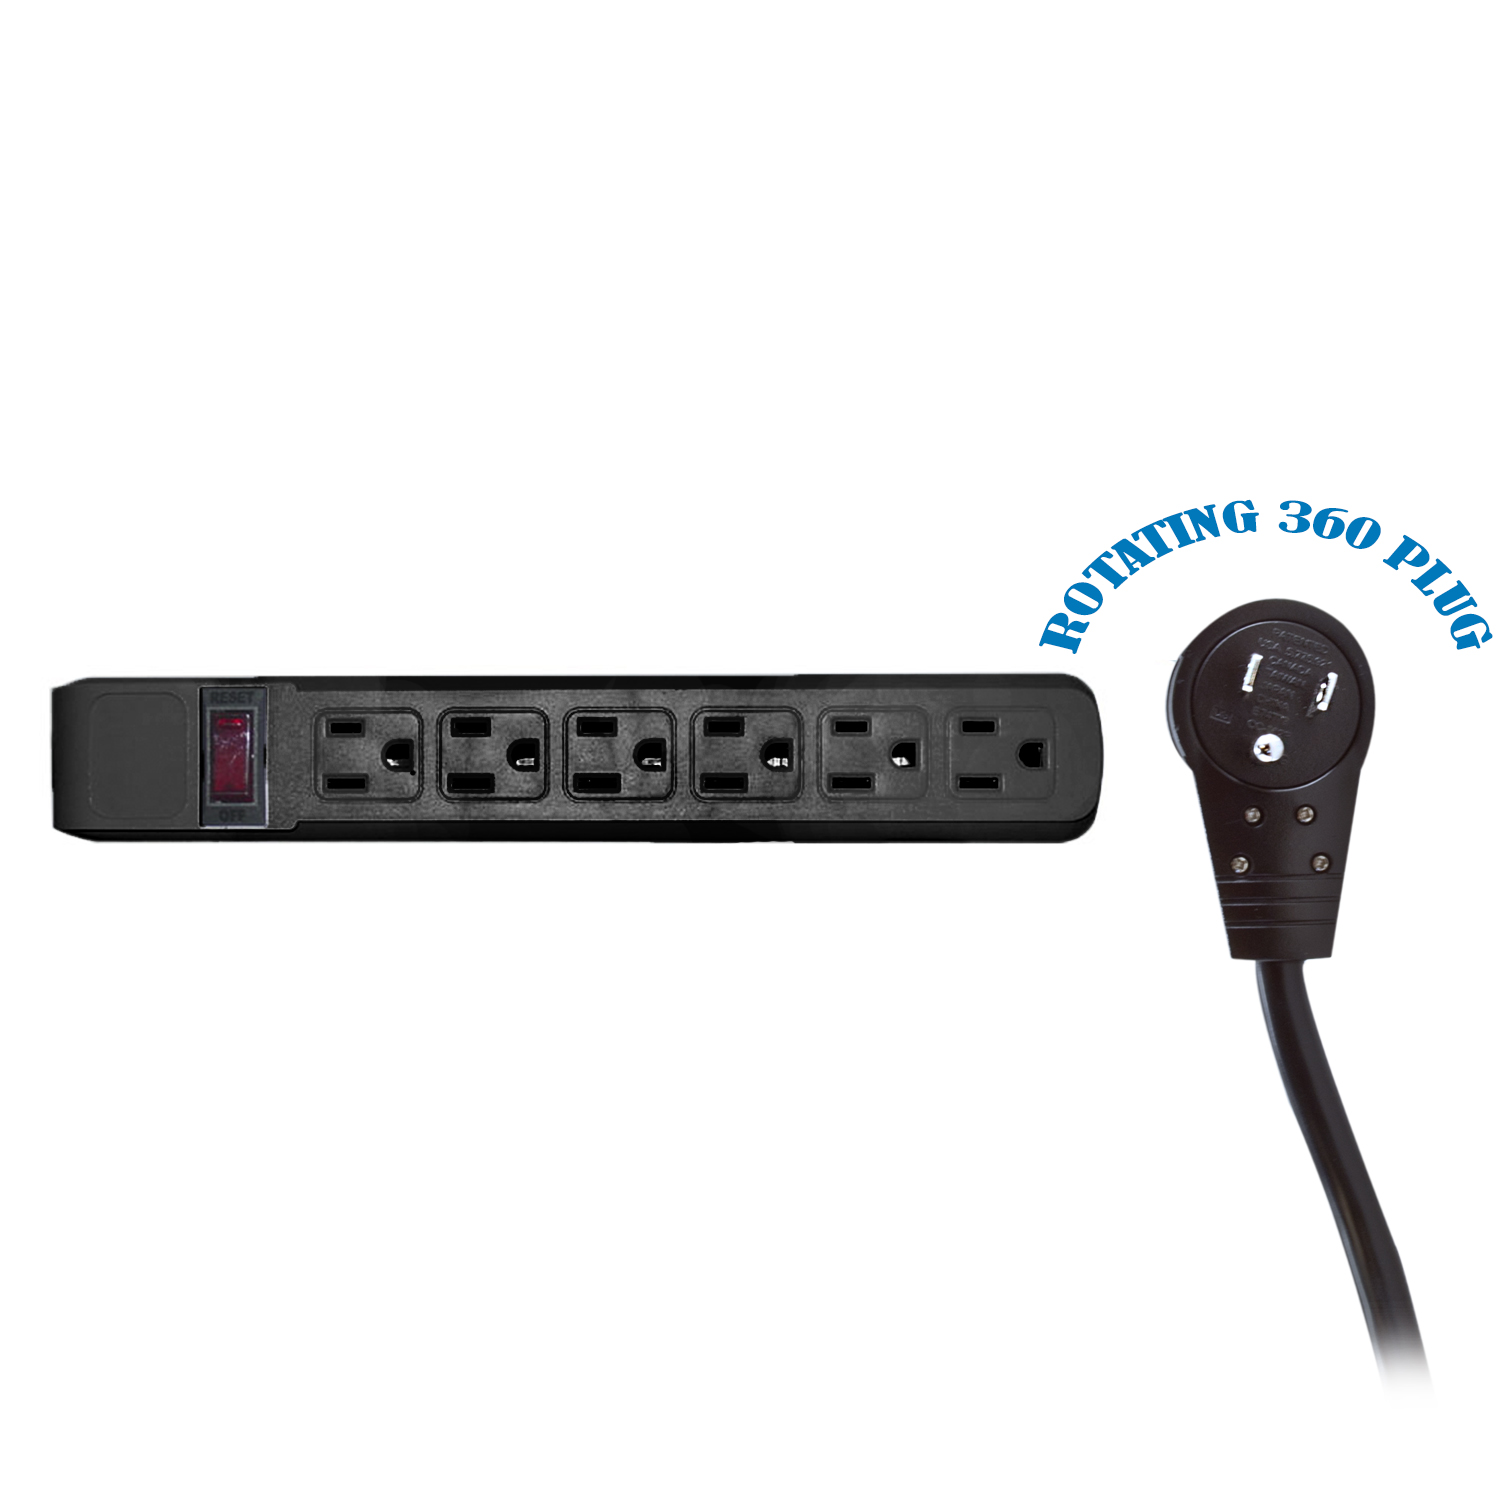 Surge Protector, Flat Rotating Plug, 6 Outlet, Black 4FT CORD - Click Image to Close